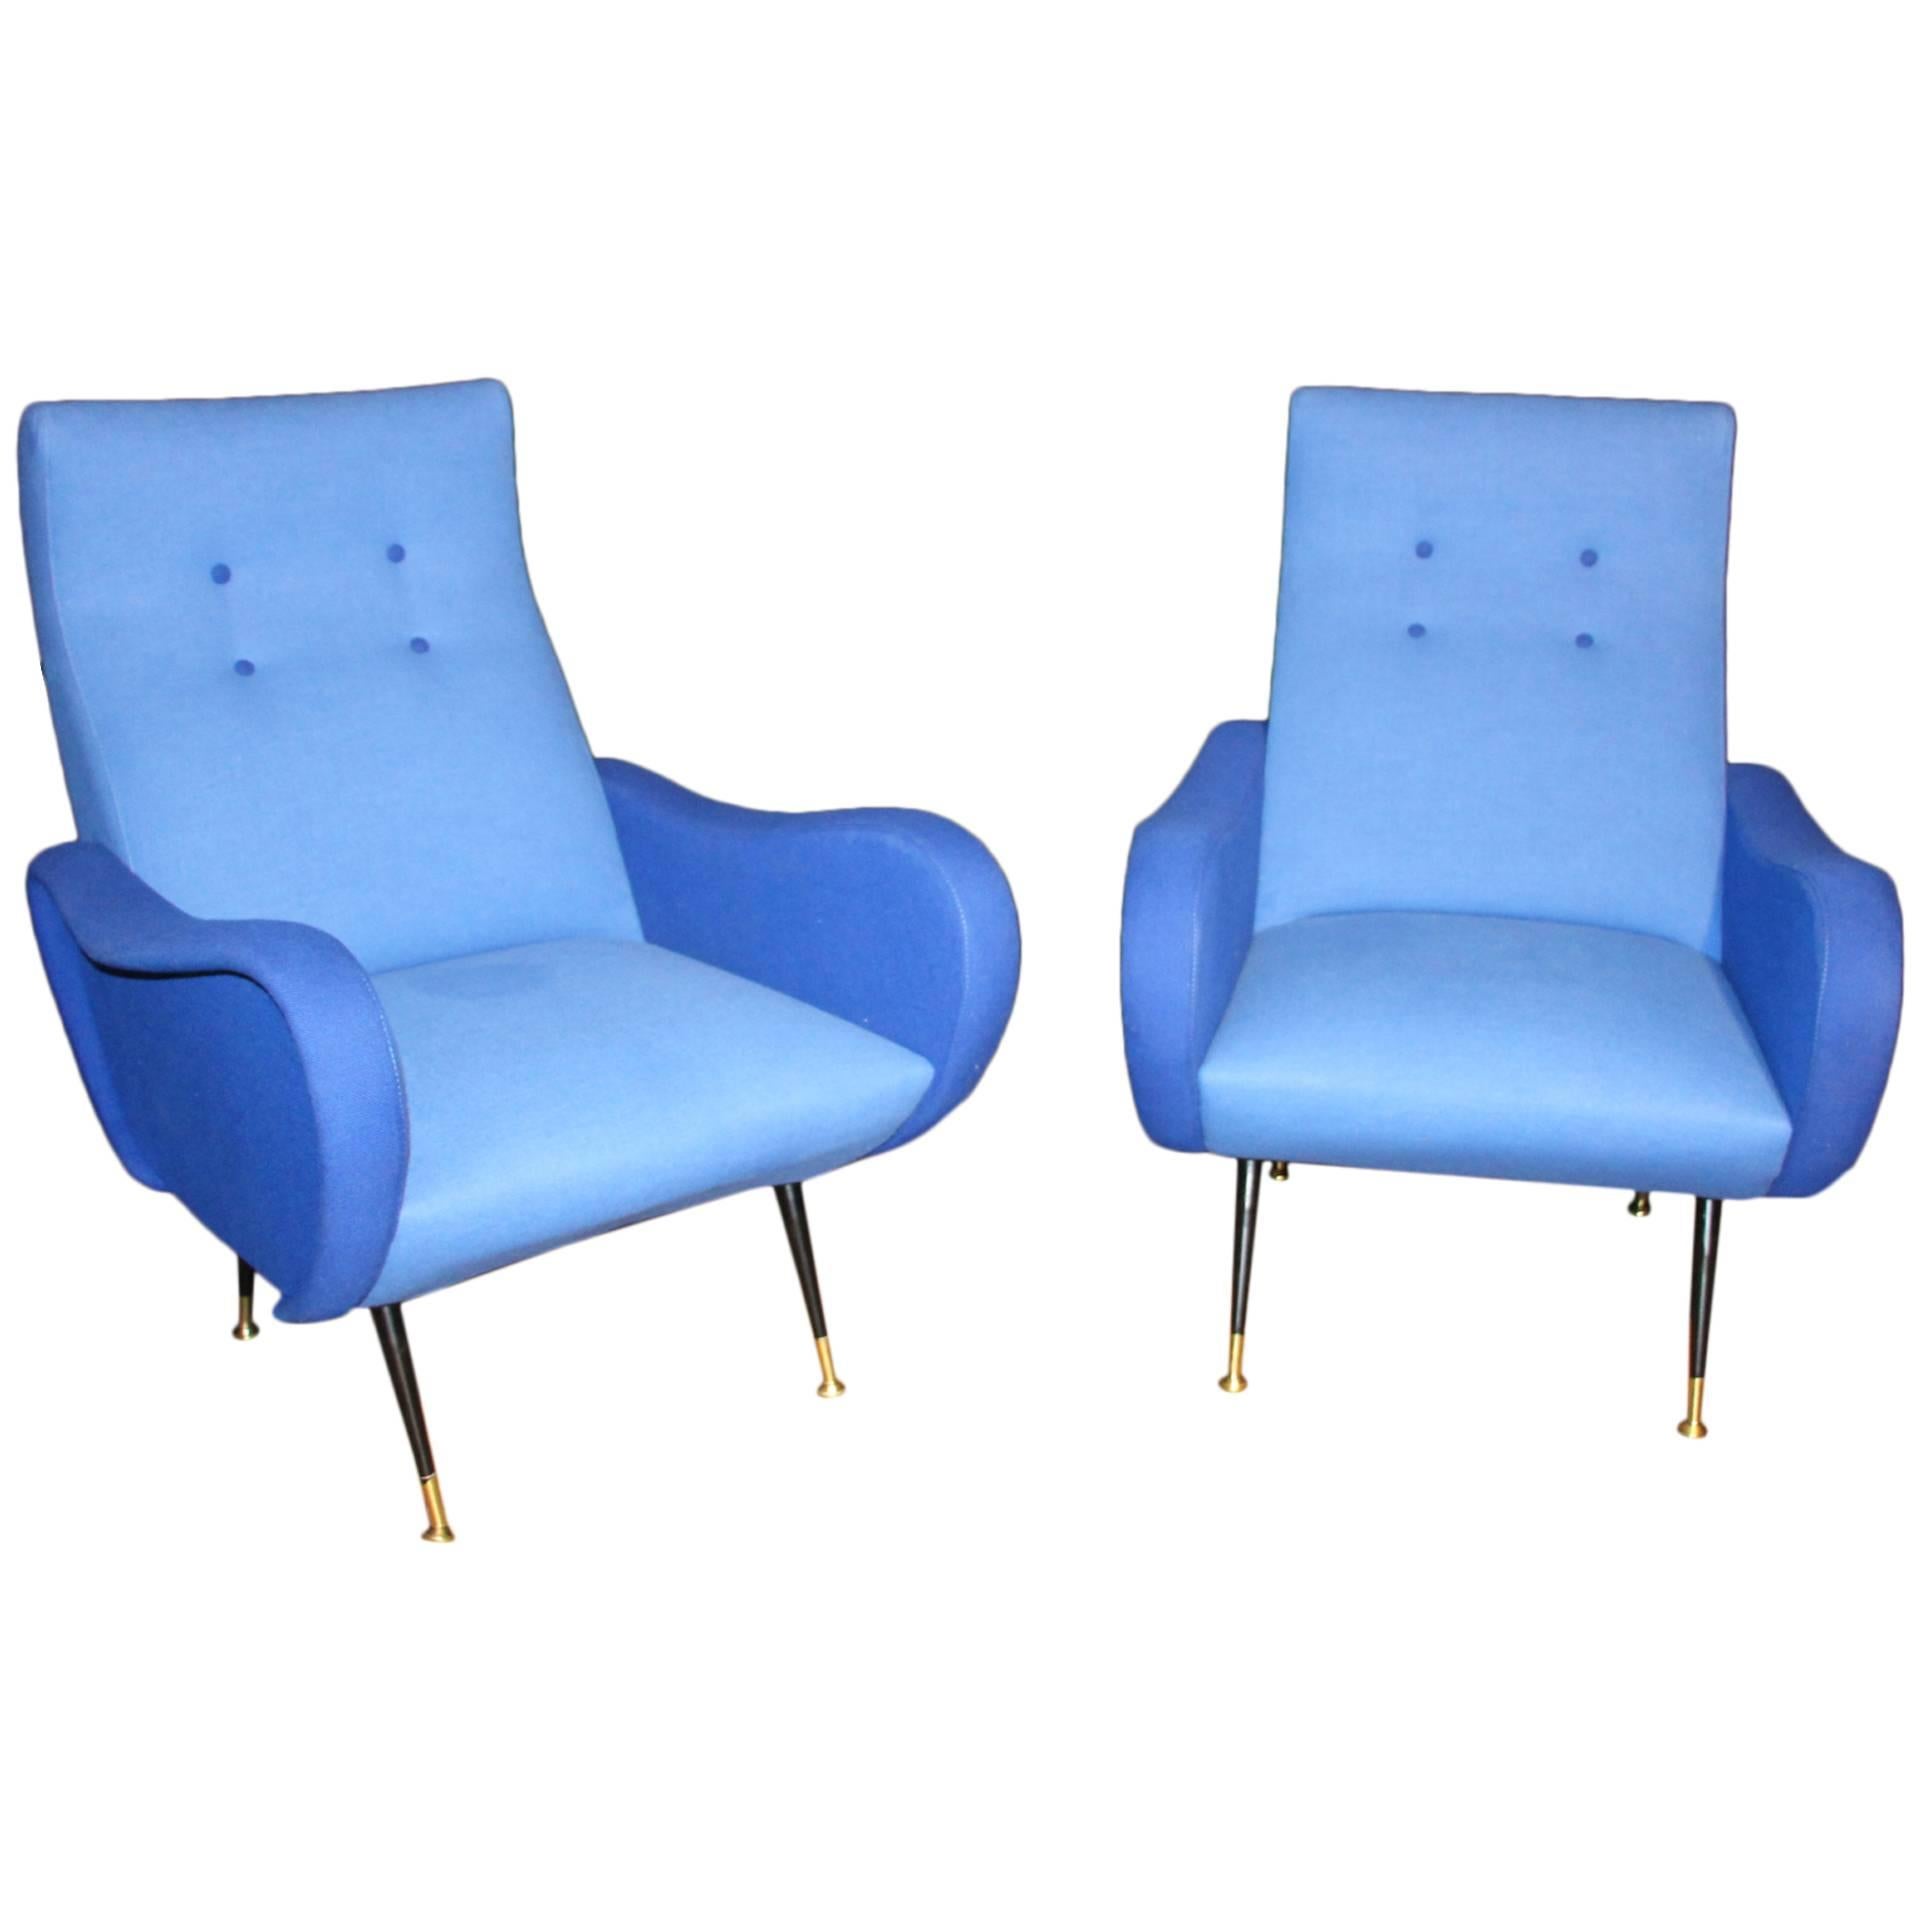 Italian Pair of Blue Mid-Century Chairs In The Style Of Zanuso